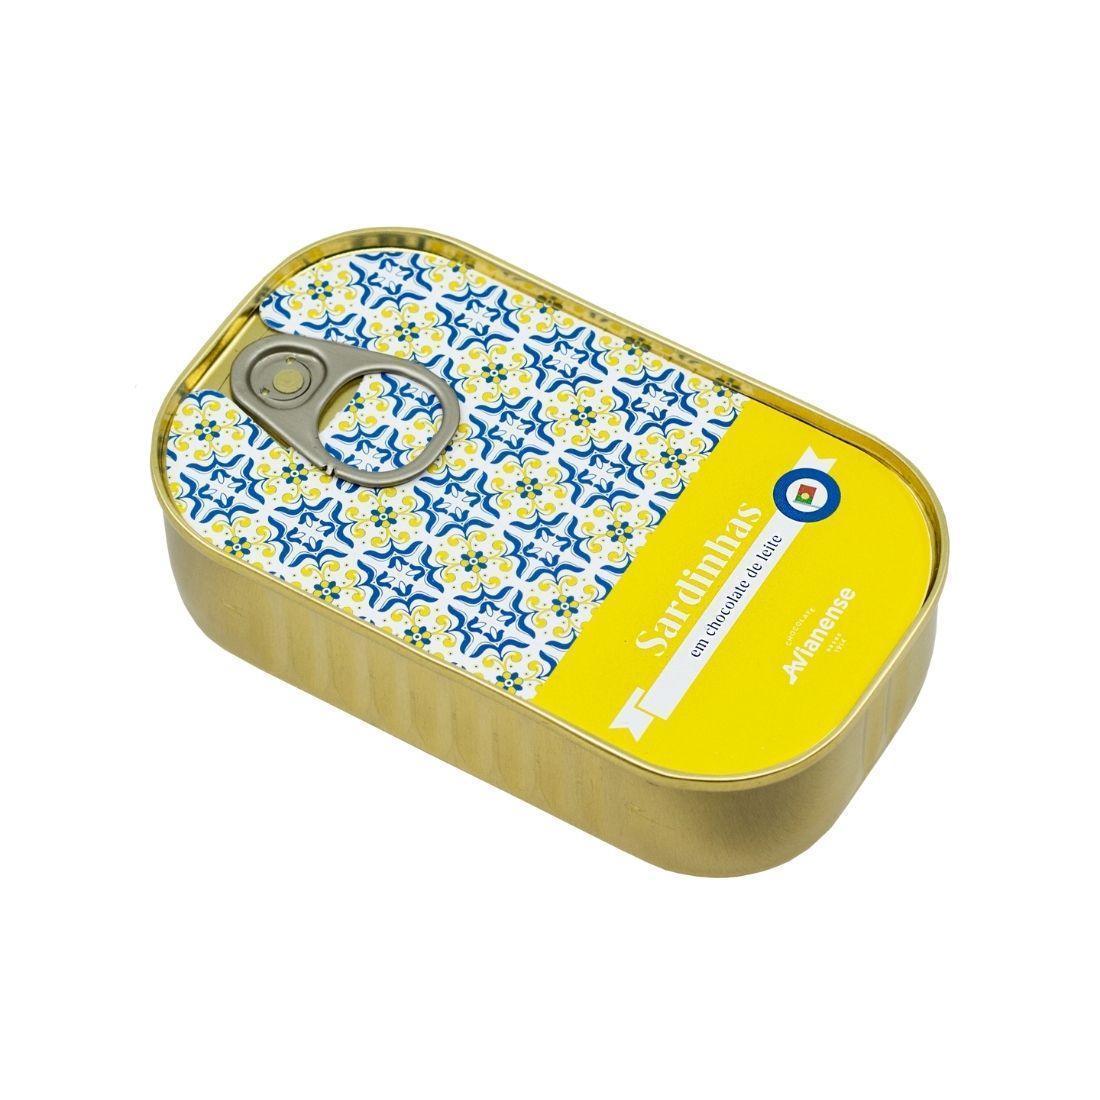 Avianense Chocolate - Small Chocolate Sardine in a can decorated with the traditional portuguese tiles